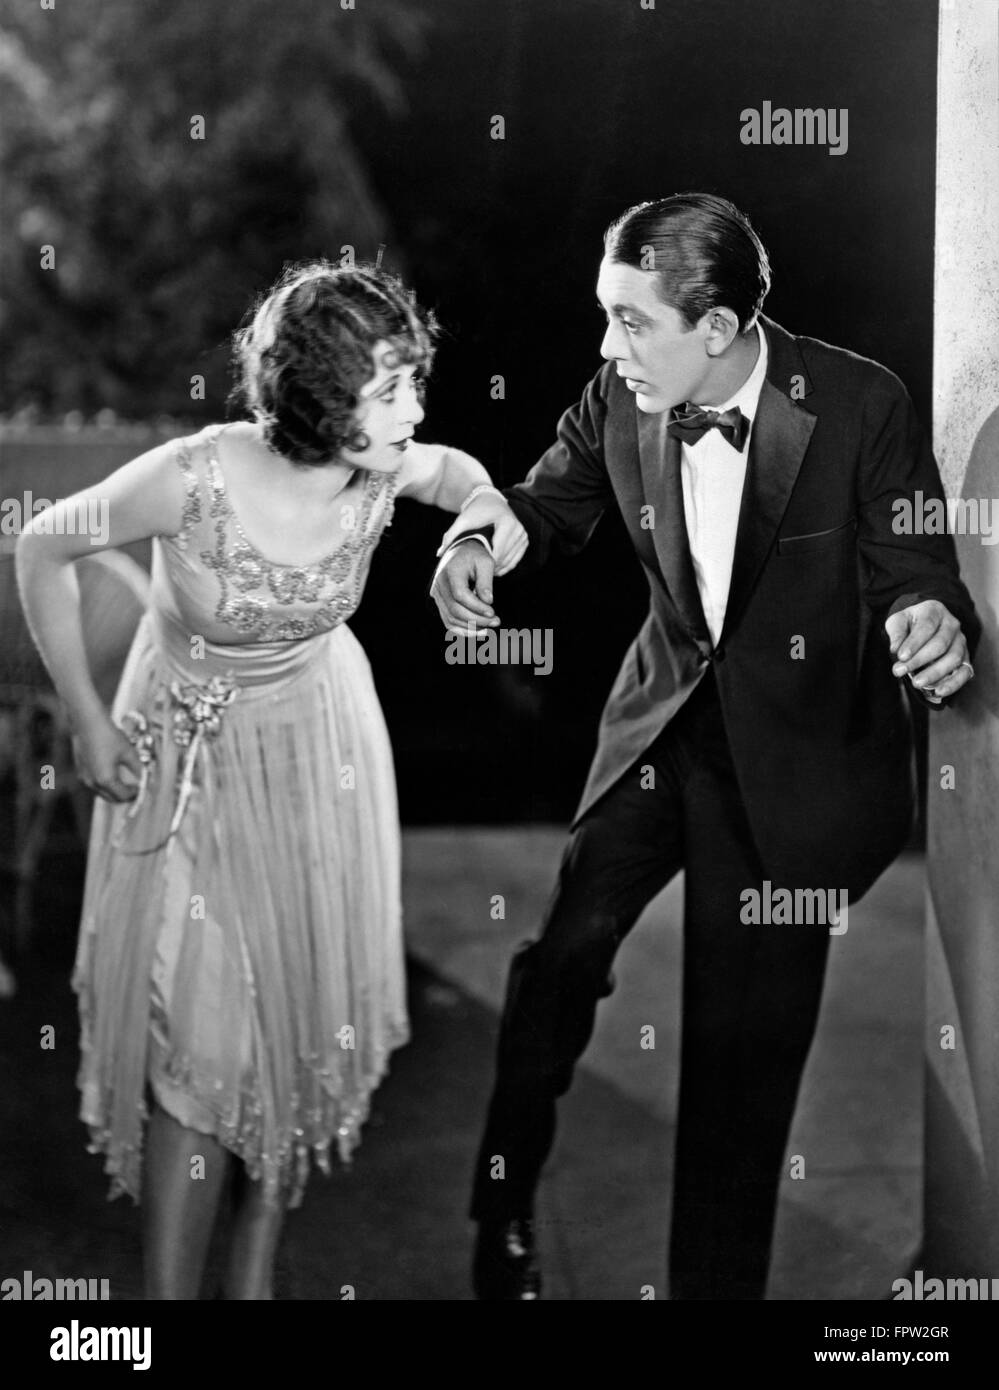 1920s COUPLE MAN WOMAN FORMAL EVENING CLOTHES DANCING OR STEPPING LIGHTLY Stock Photo